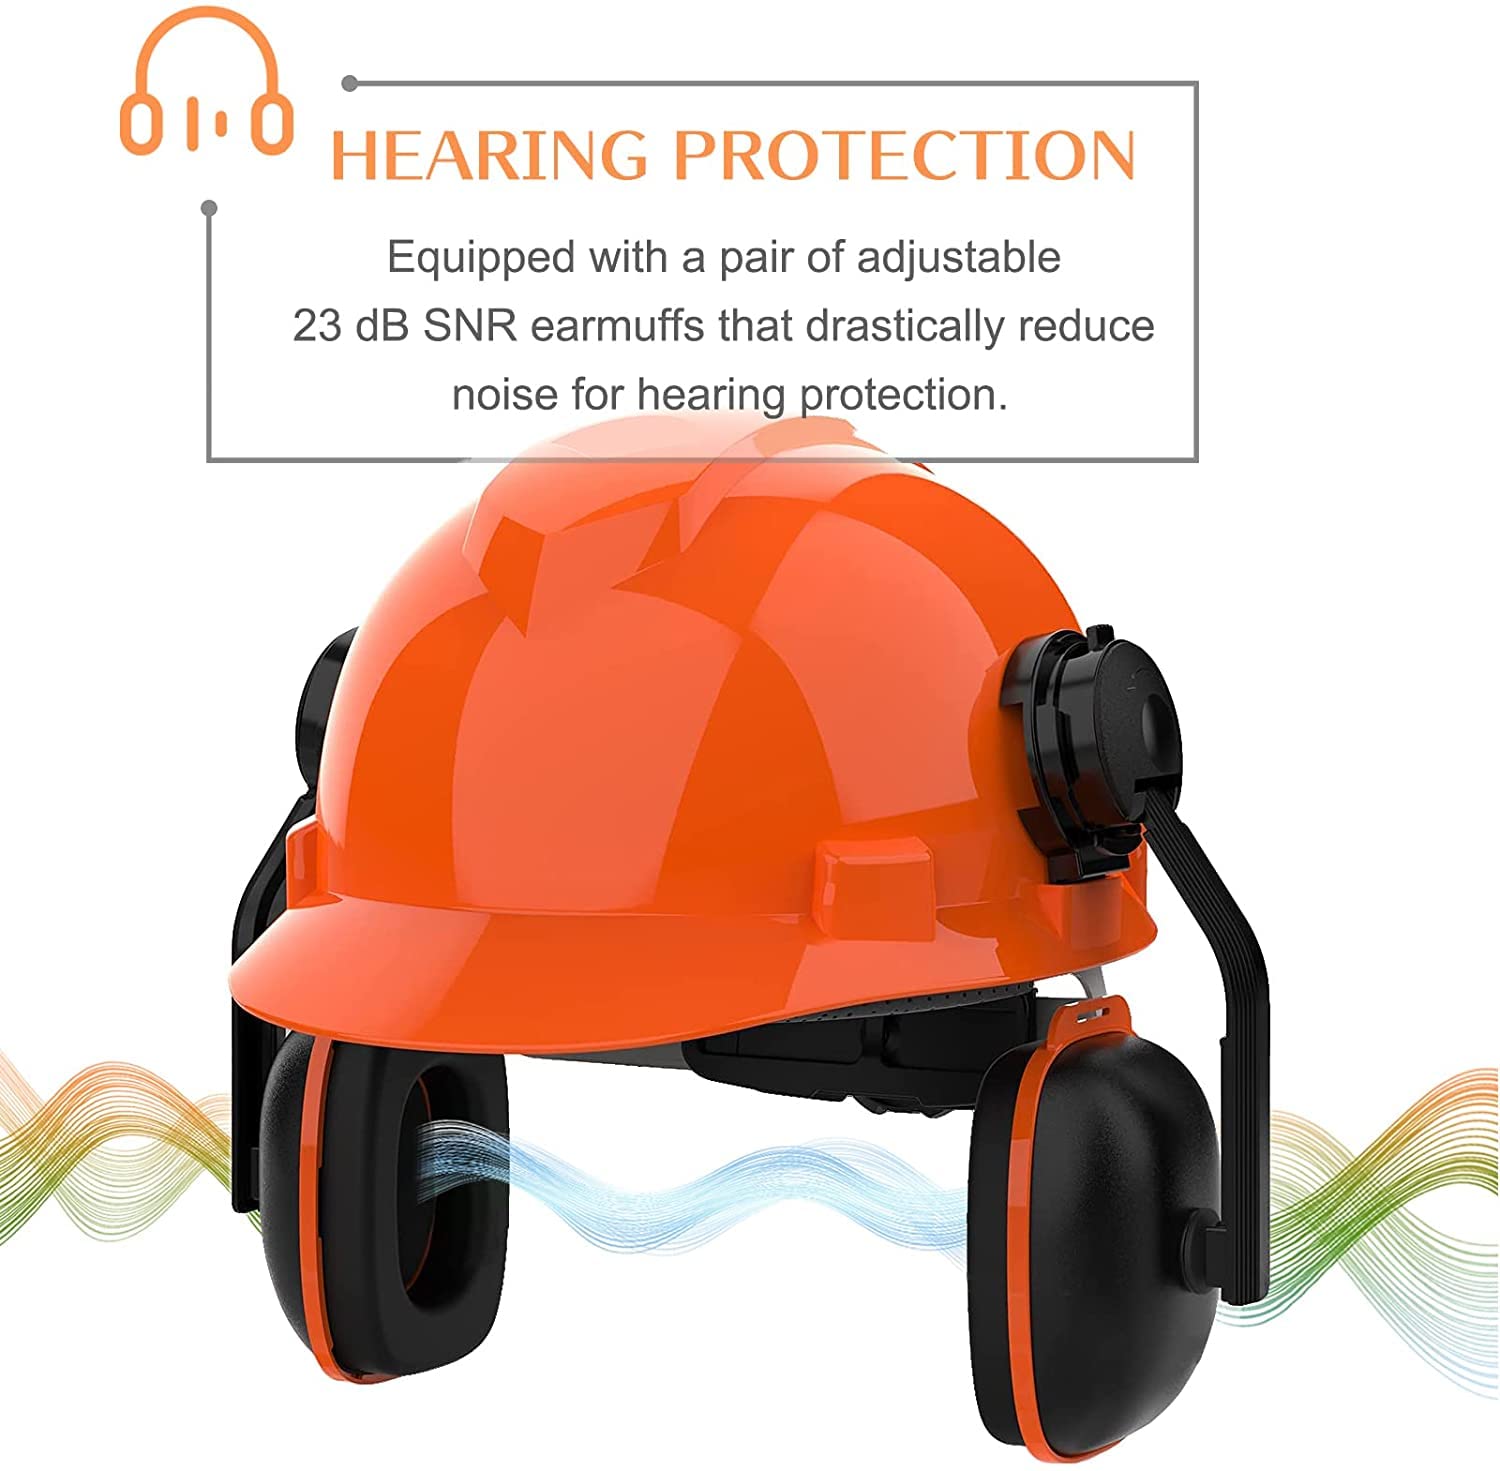 Chainsaw Helmet with Face Shield and Ear Muffs, Forestry Professional Helmet with Visor Combo Set, Helmet for Chainsaw Use, Removable Ear Muffs and Visors by WONDERHOO